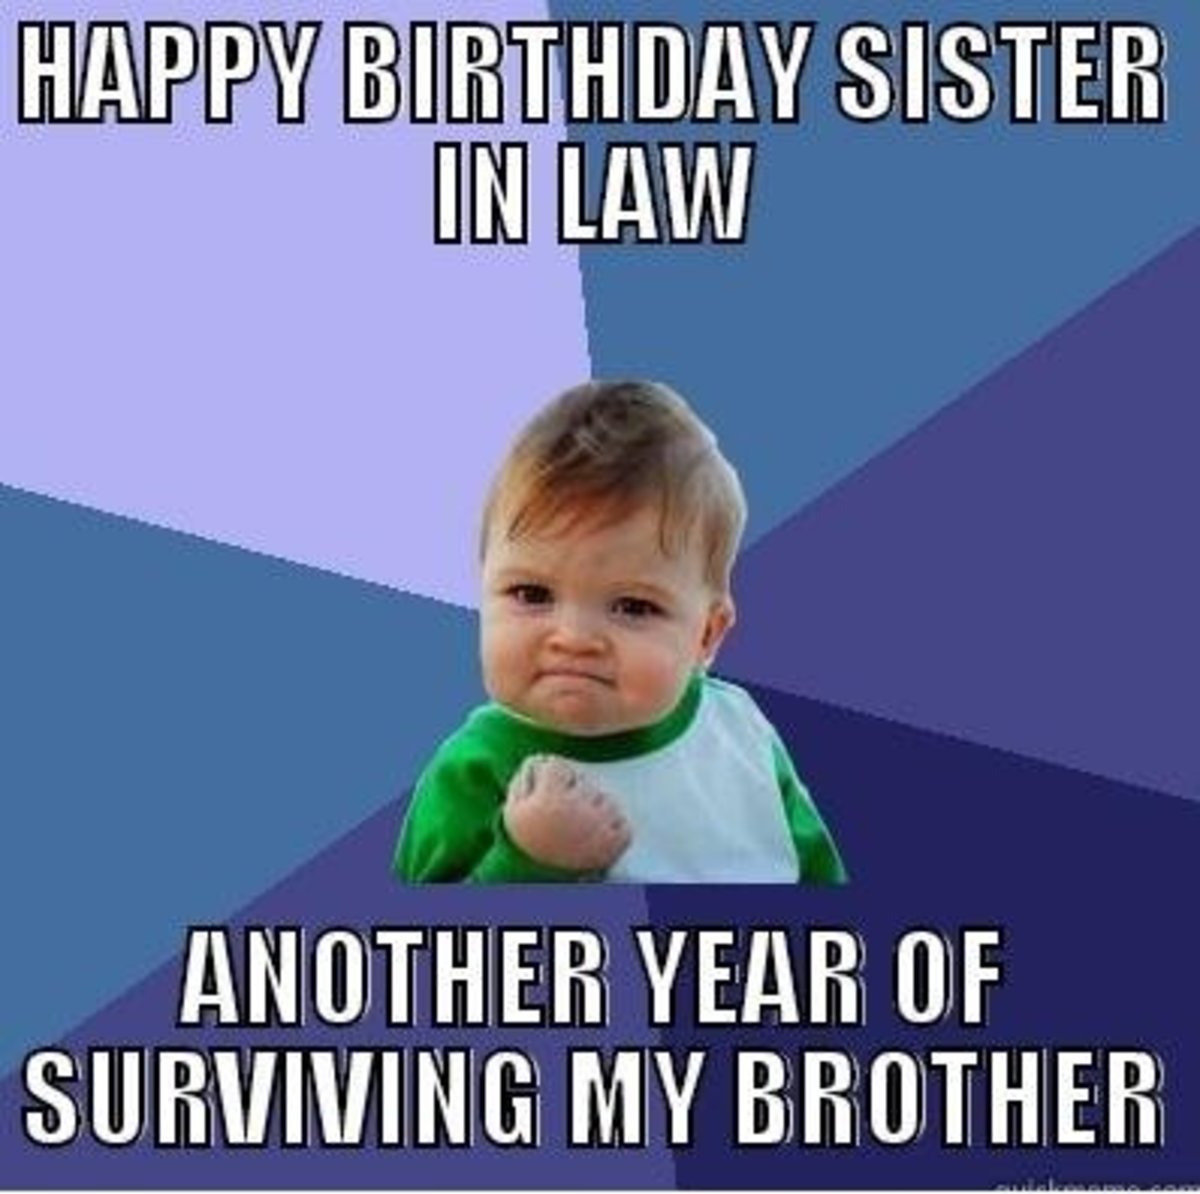 Happy Birthday Sister in Law Quotes and Meme | hubpages